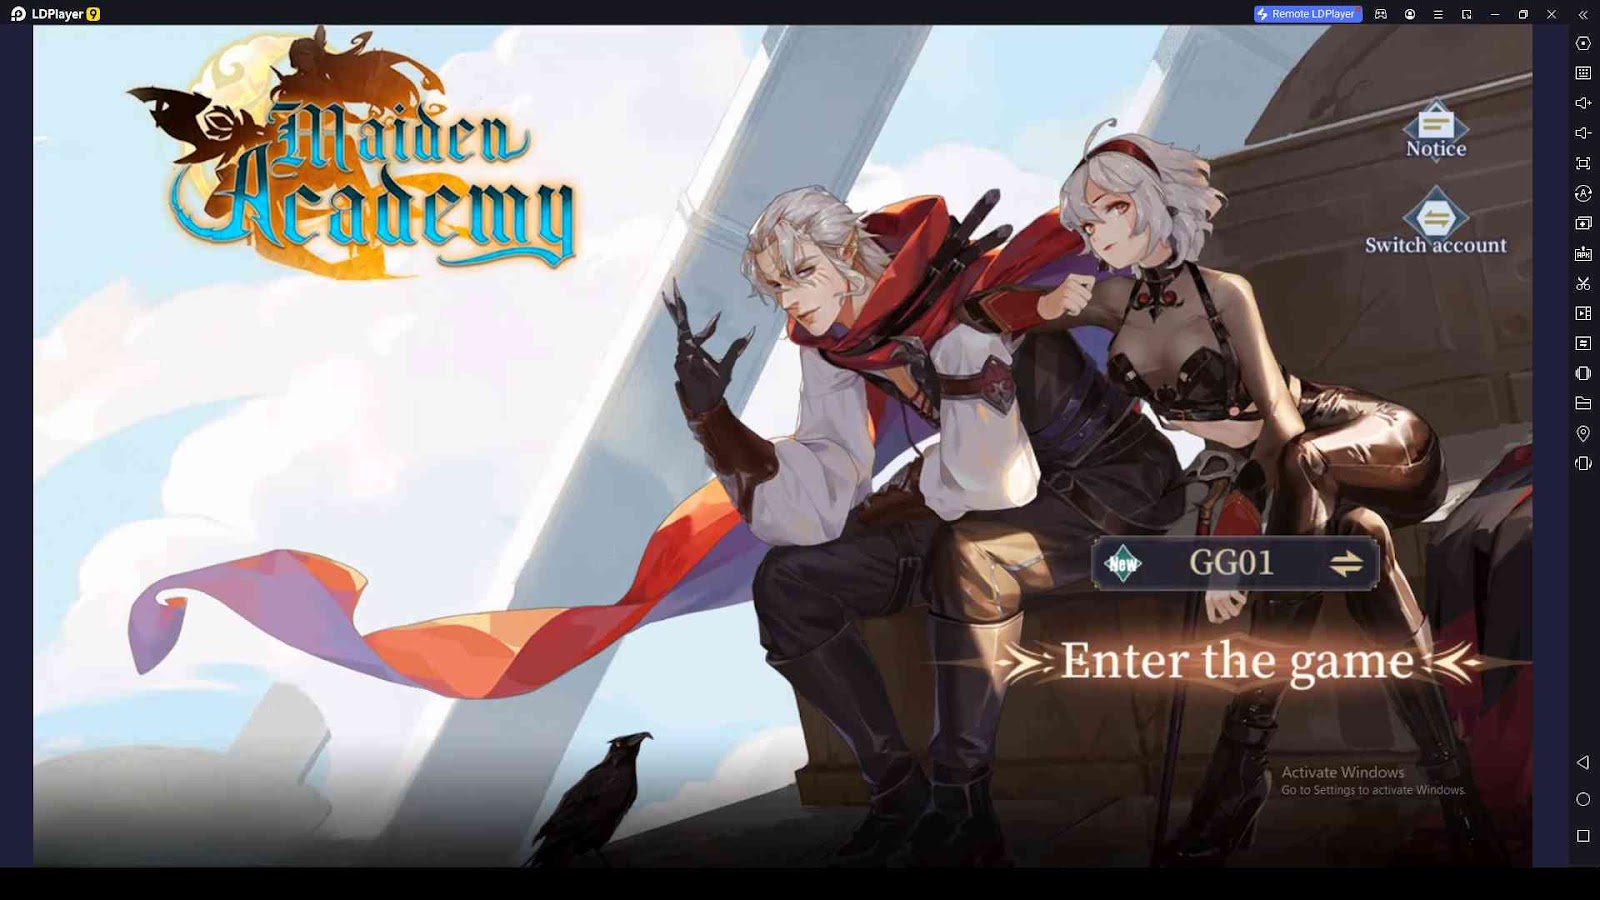  Maiden Academy: Idle RPG Beginner Guide and Tips